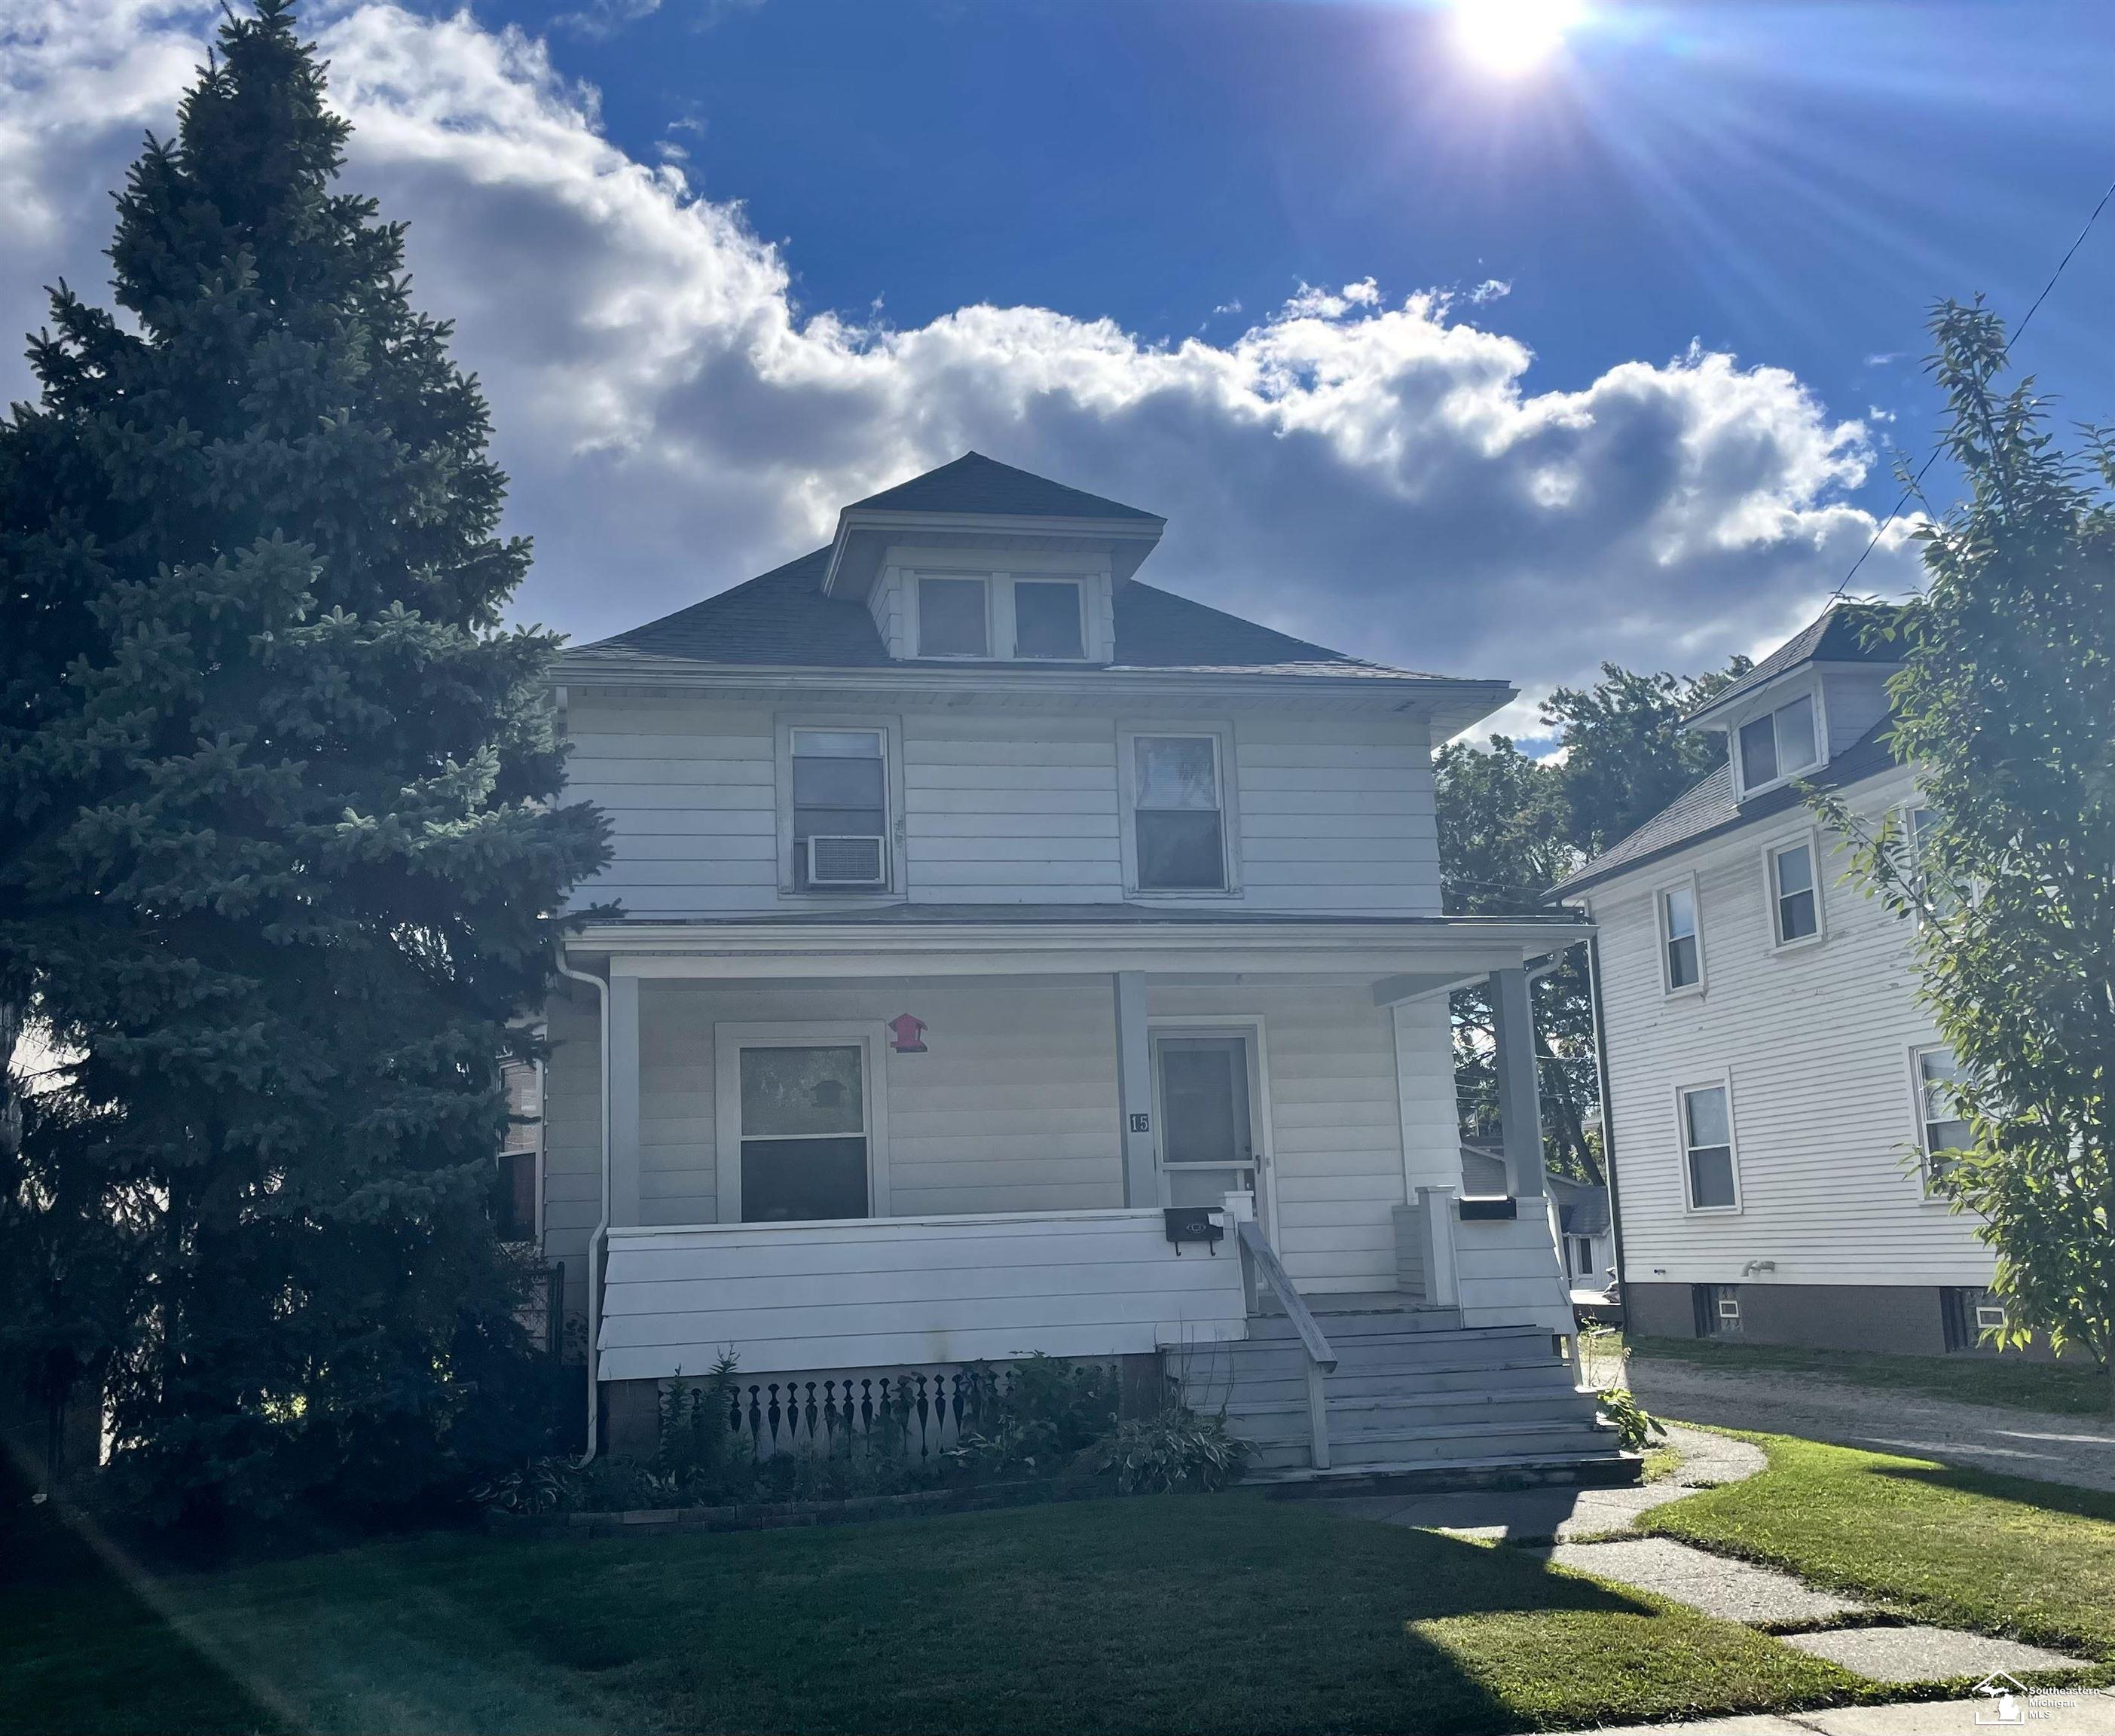 Great home with options!! Use as your family home (5 bedrooms) or as an investment opportunity! Home was once a duplex, live on one level and rent out the other! Close to Historical Downtown Monroe, ST. Marys Catholic Central, shopping, public park, and restaurants!Bring all offers